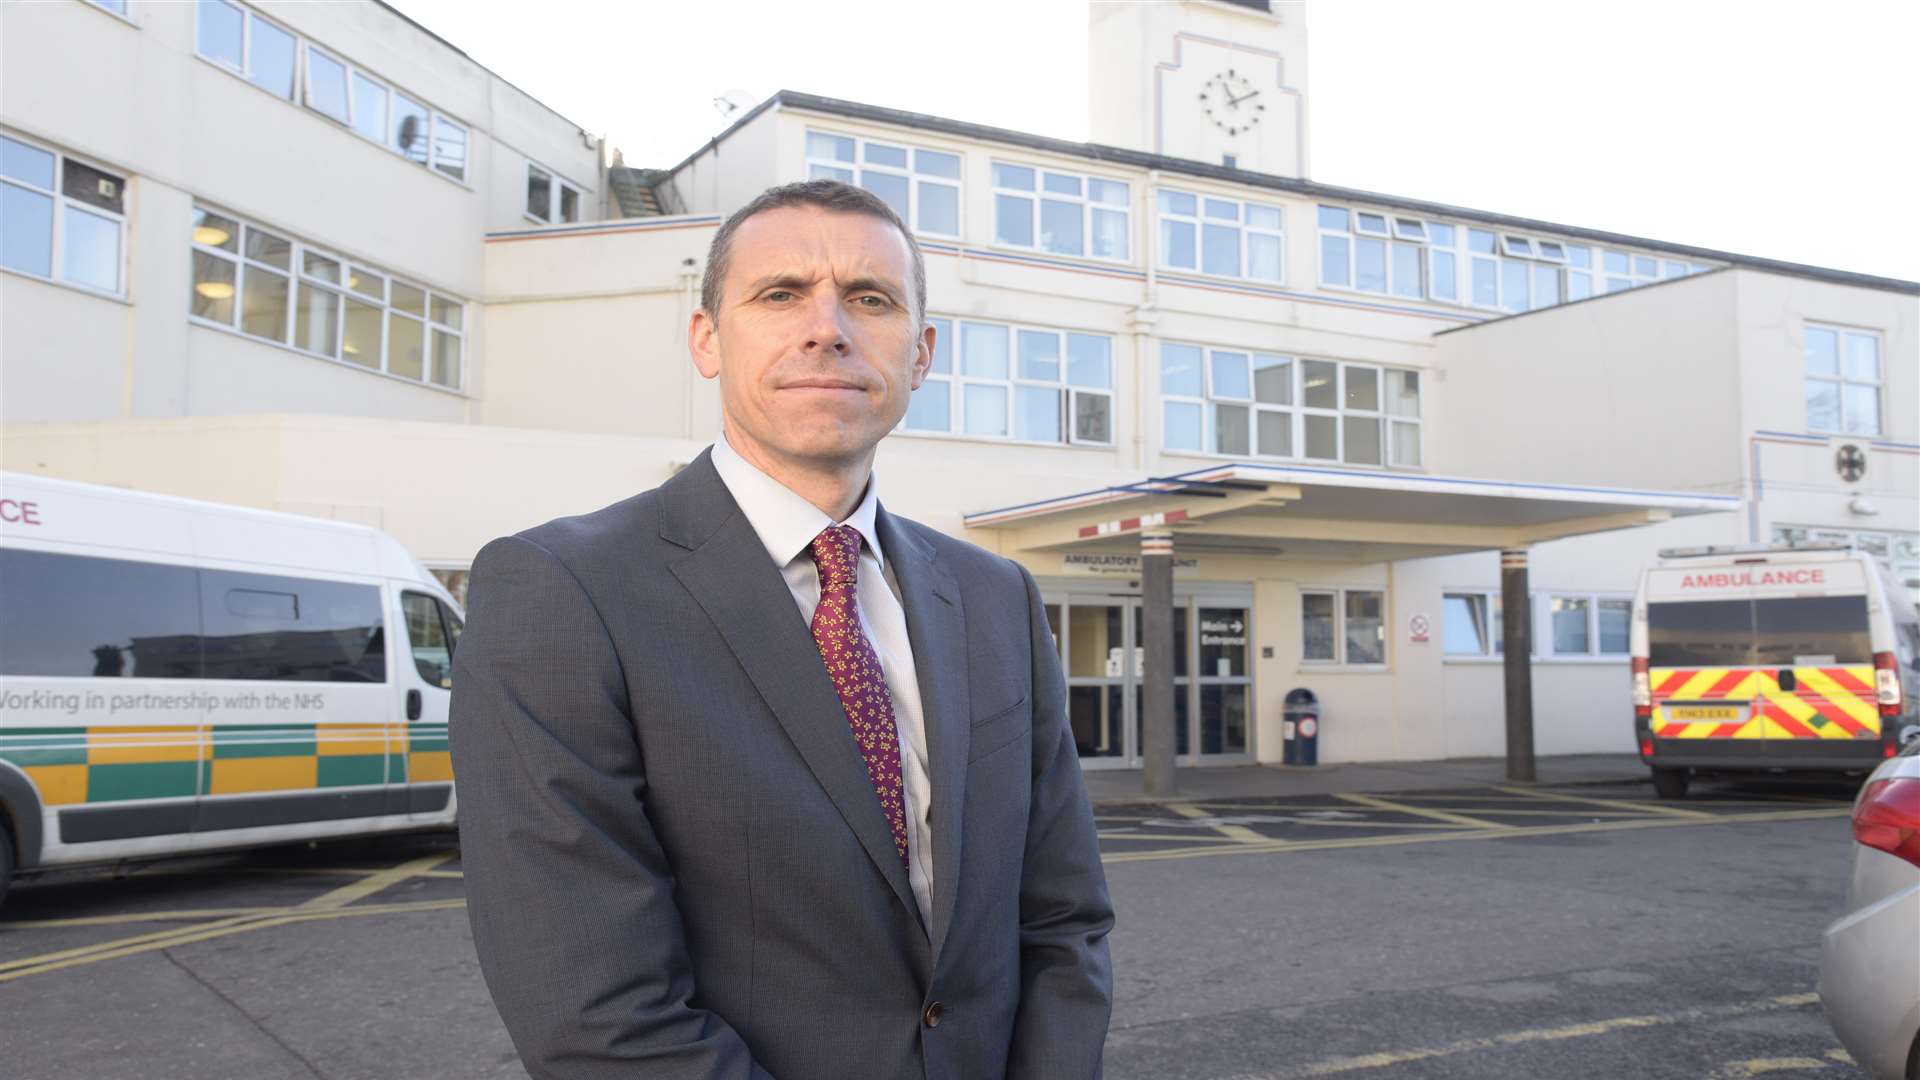 Matthew Kershaw insists the hospitals trust has no firm plans over the future of its sites.